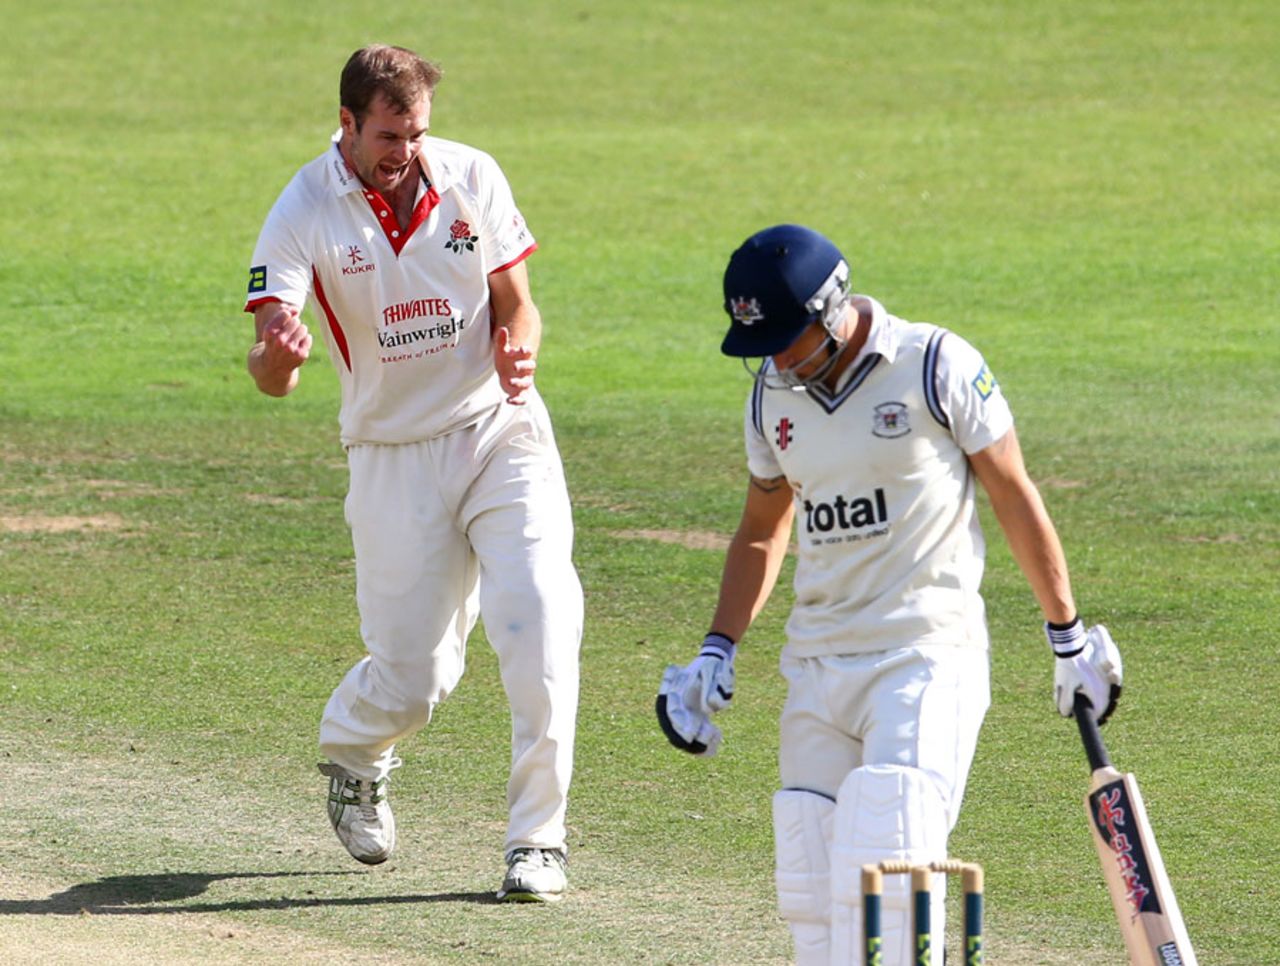 Tom Smith celebrates a wicket, Gloucestershire v Lancashire, County Championship, Division Two, Bristol, 4th day, September 20, 2013